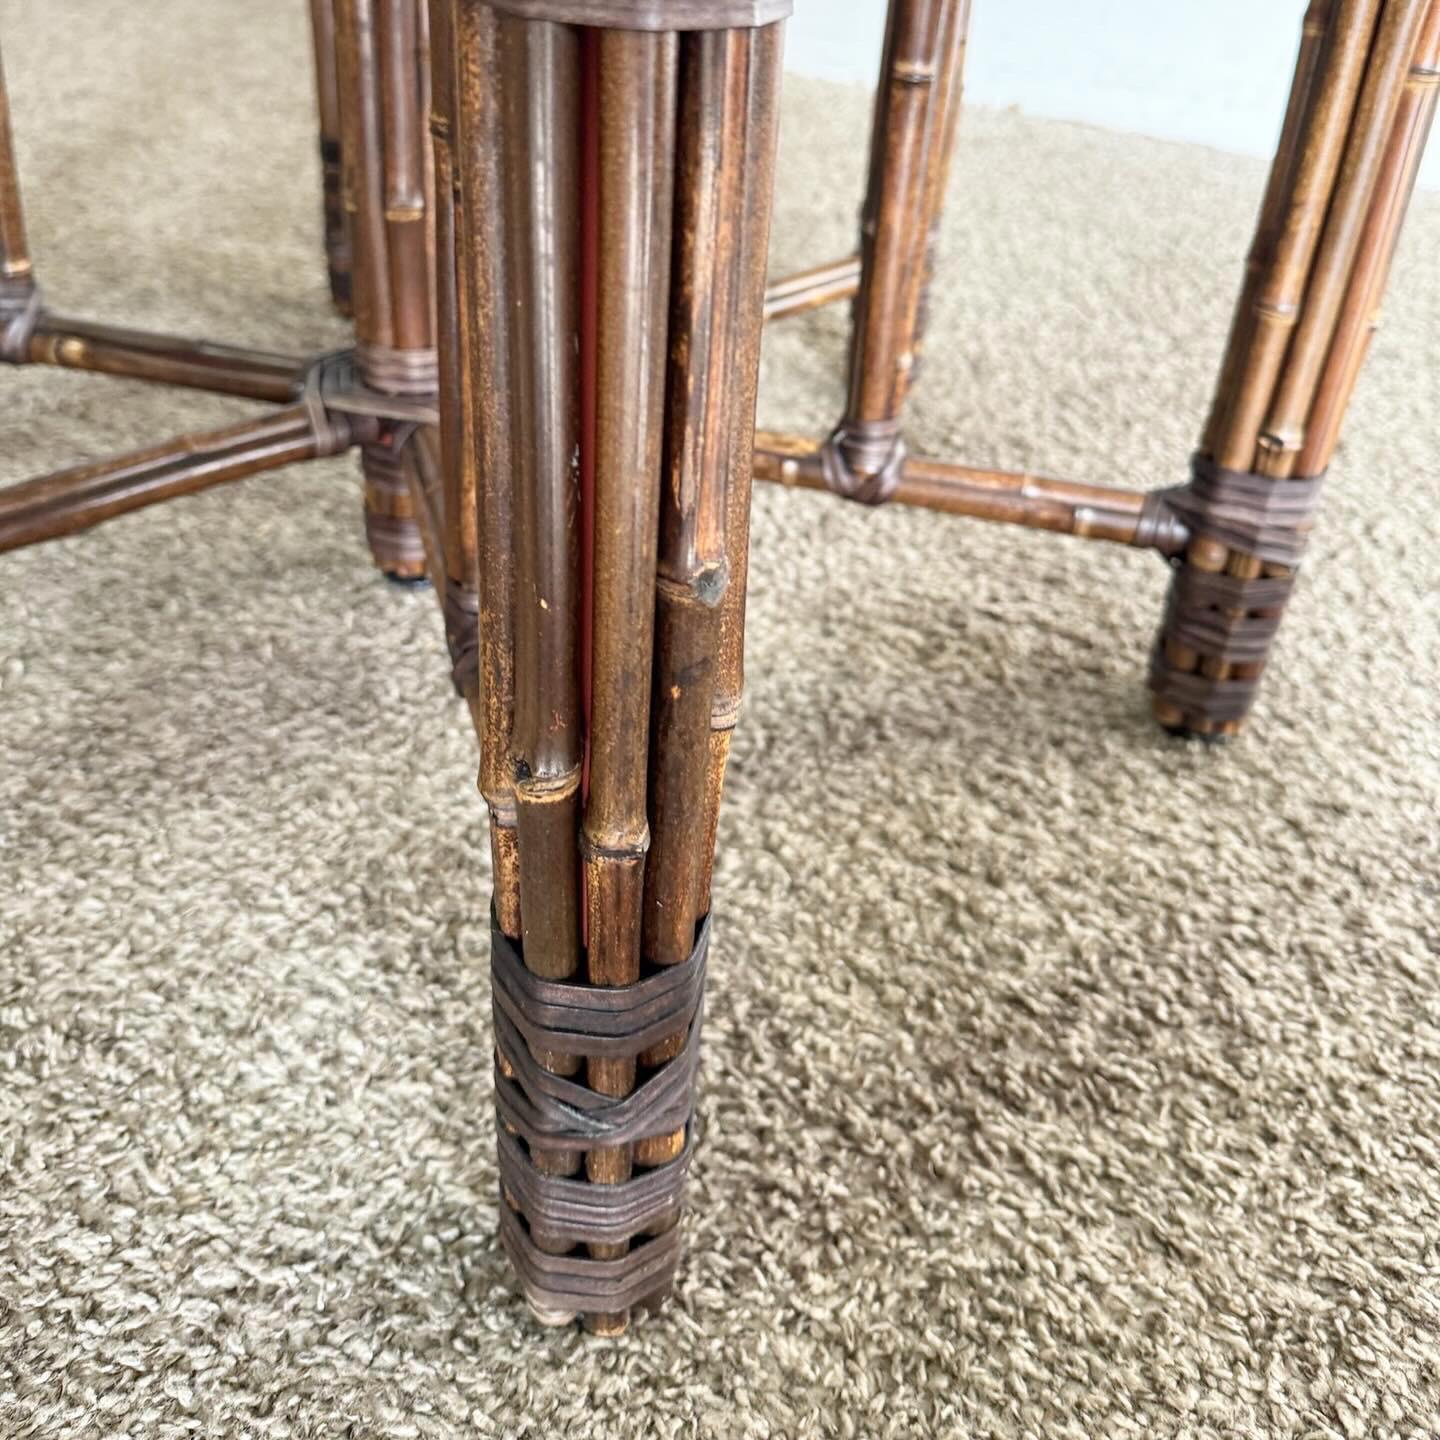 The McGuire Style Boho Chic Bamboo Rattan Dining Table Base is an exquisite addition to any dining area. Inspired by McGuire's iconic design, it showcases the natural beauty and craftsmanship of bamboo and rattan. This sturdy base adds a warm,